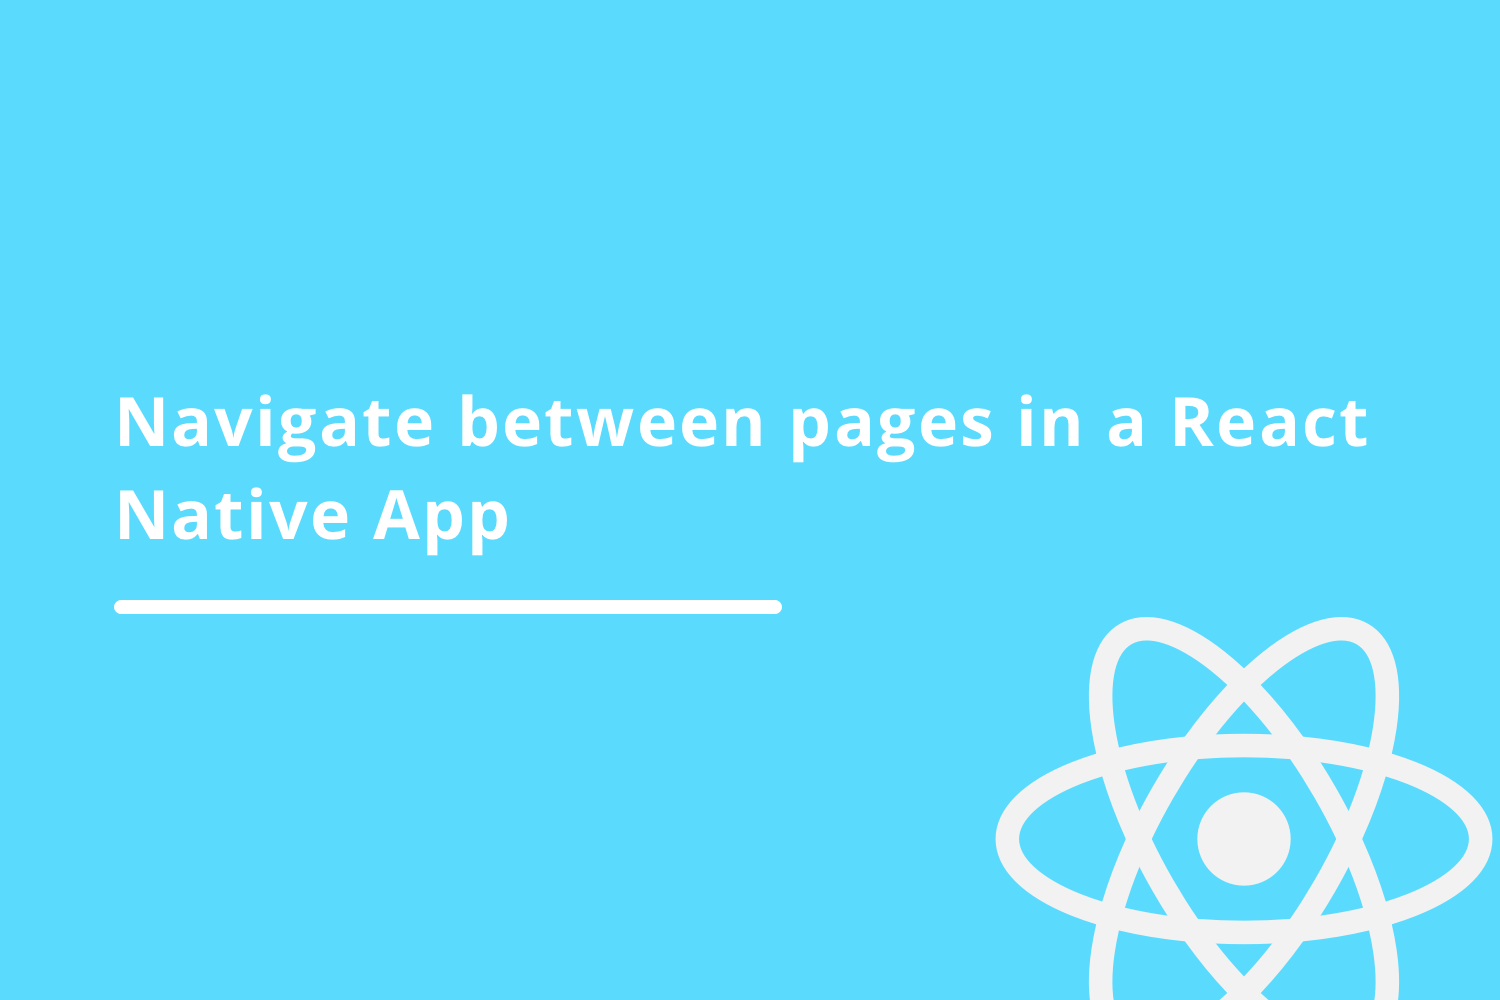 Navigate between pages in a React Native App